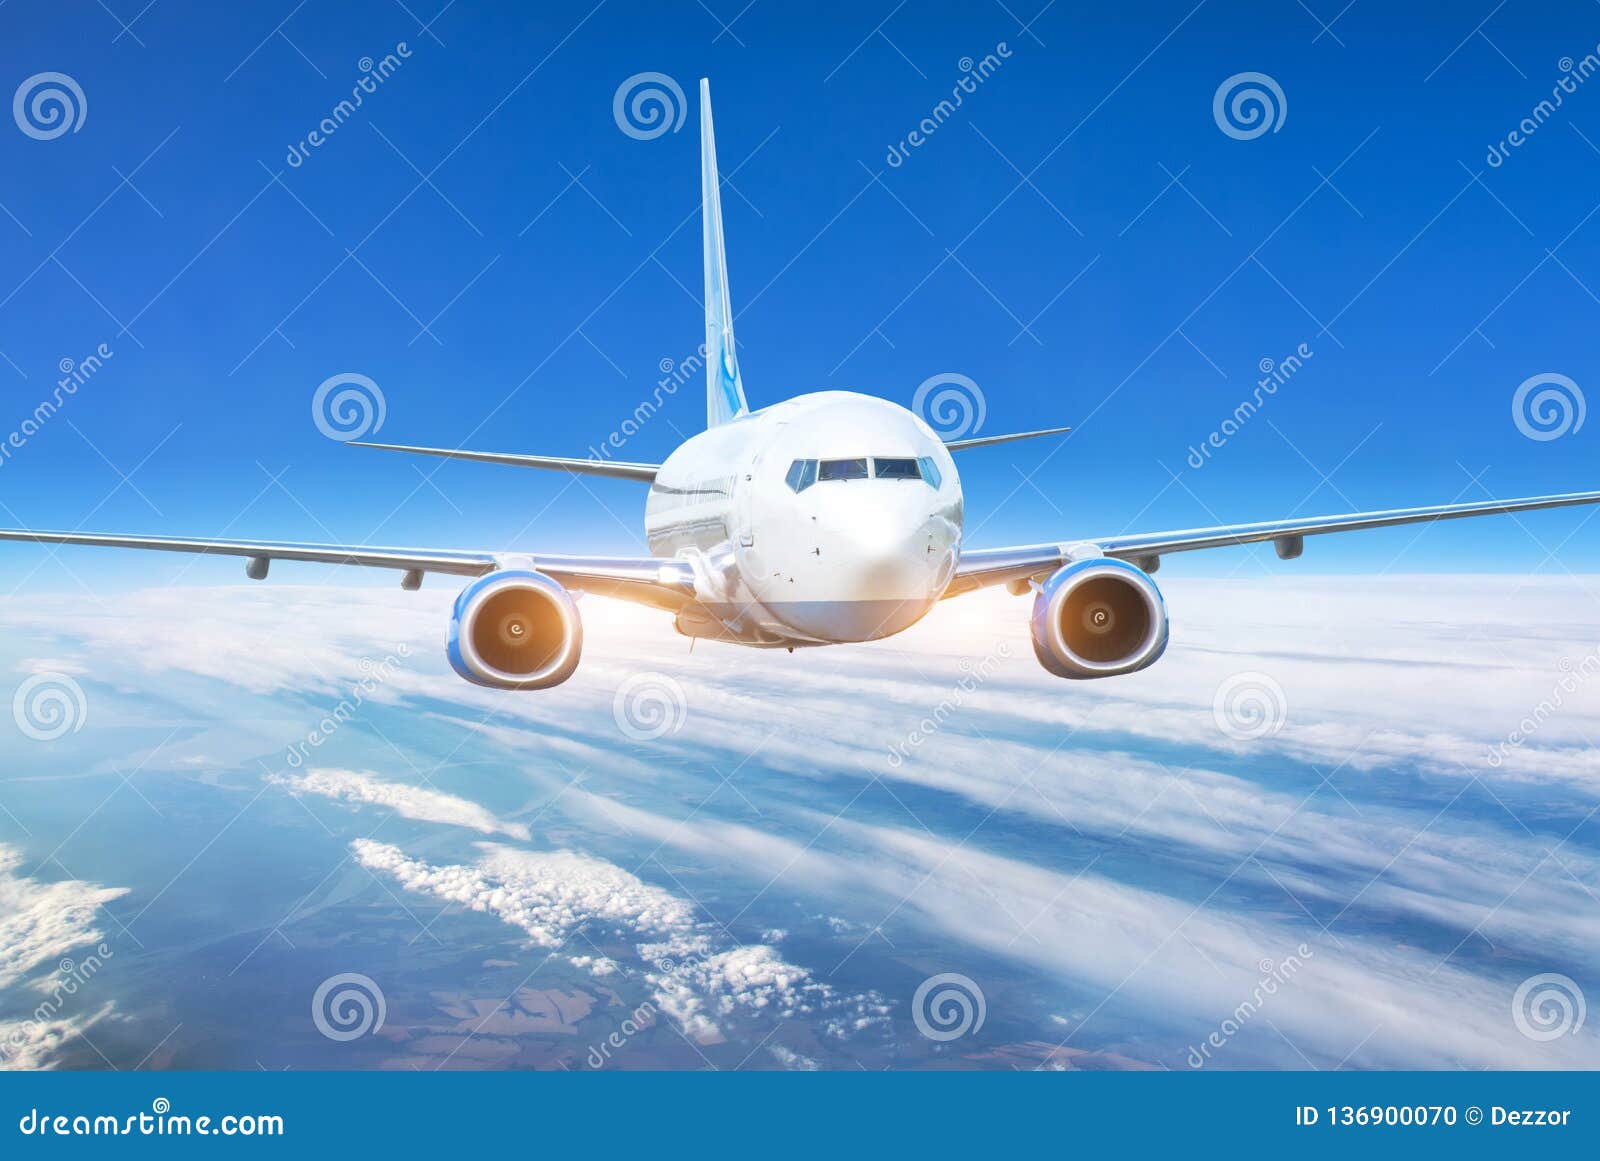 passenger jet plane in the blue sky. aircraft flying high through the cumulus clouds. close up view airplane in flight